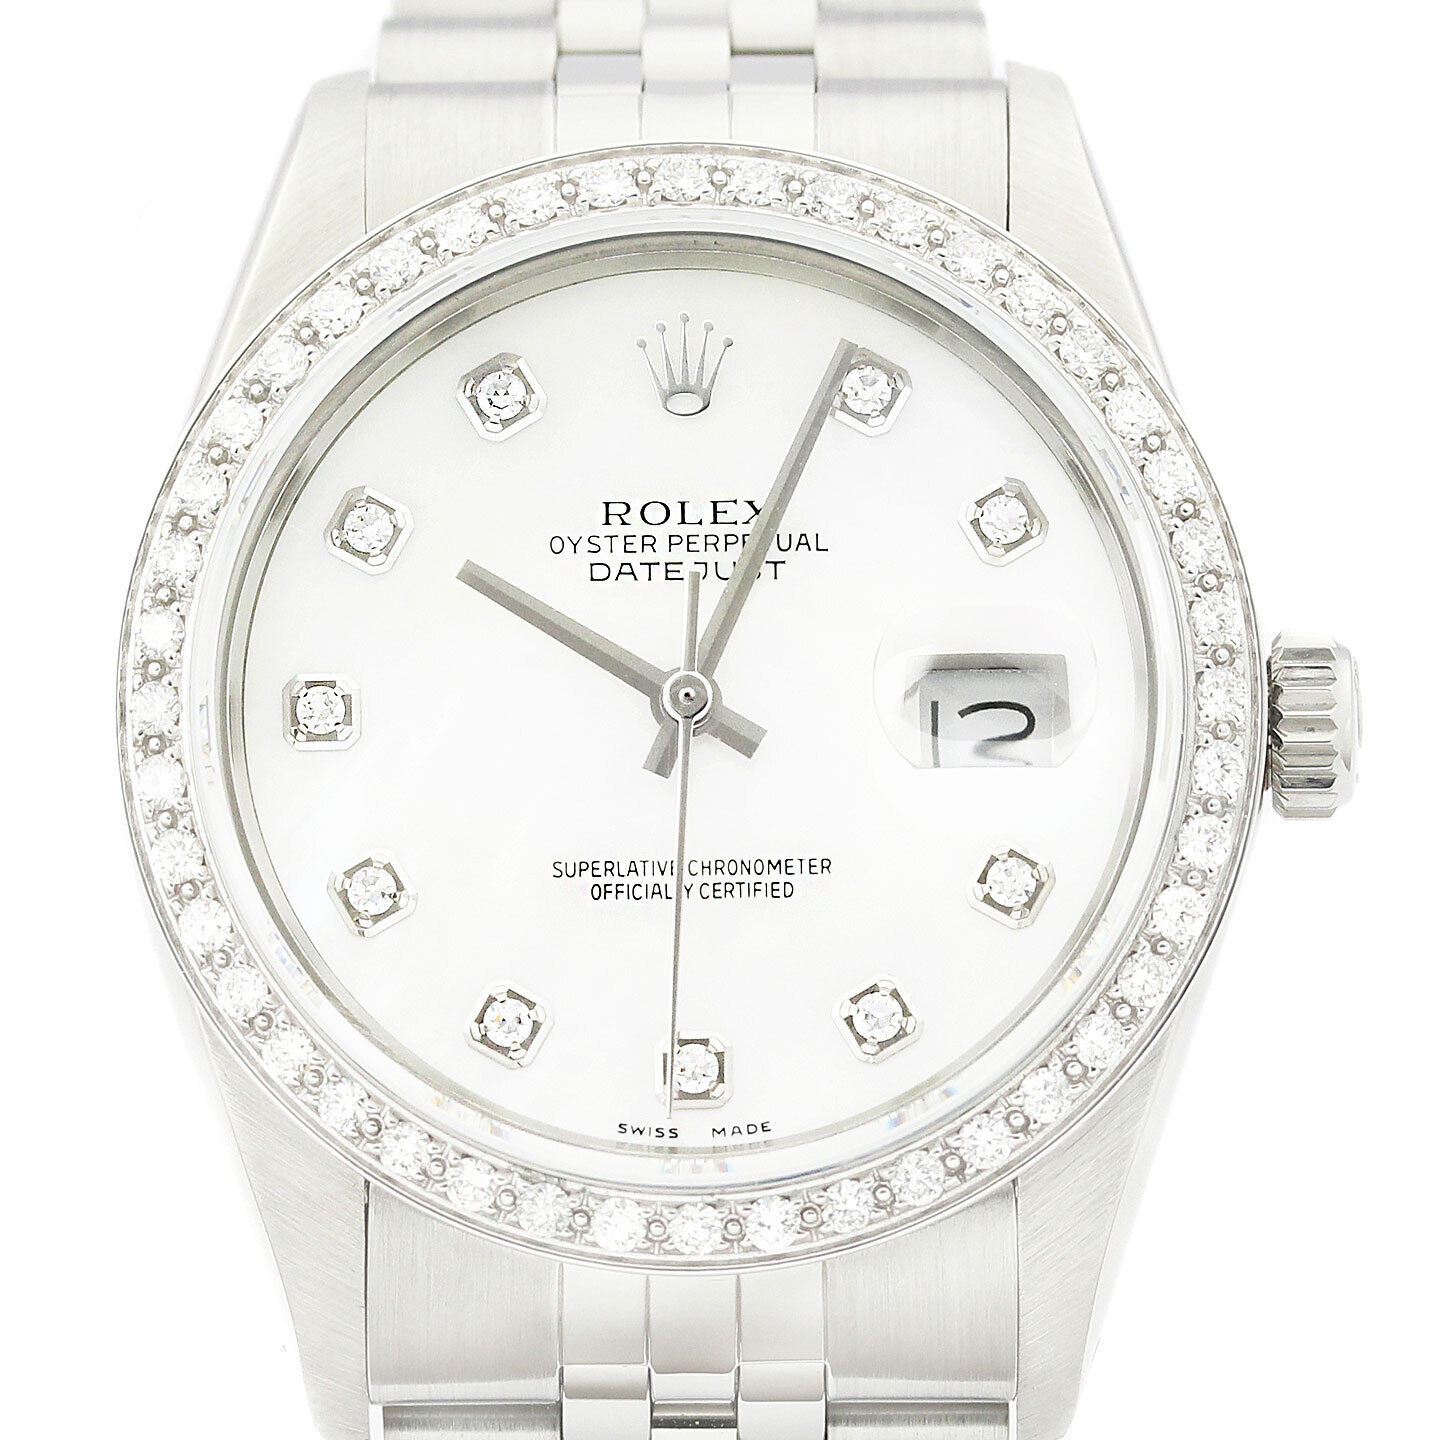 Rolex Mens Datejust 16014 Mother of Pearl Dial 18K White Gold SS Diamond  Watch | eBay